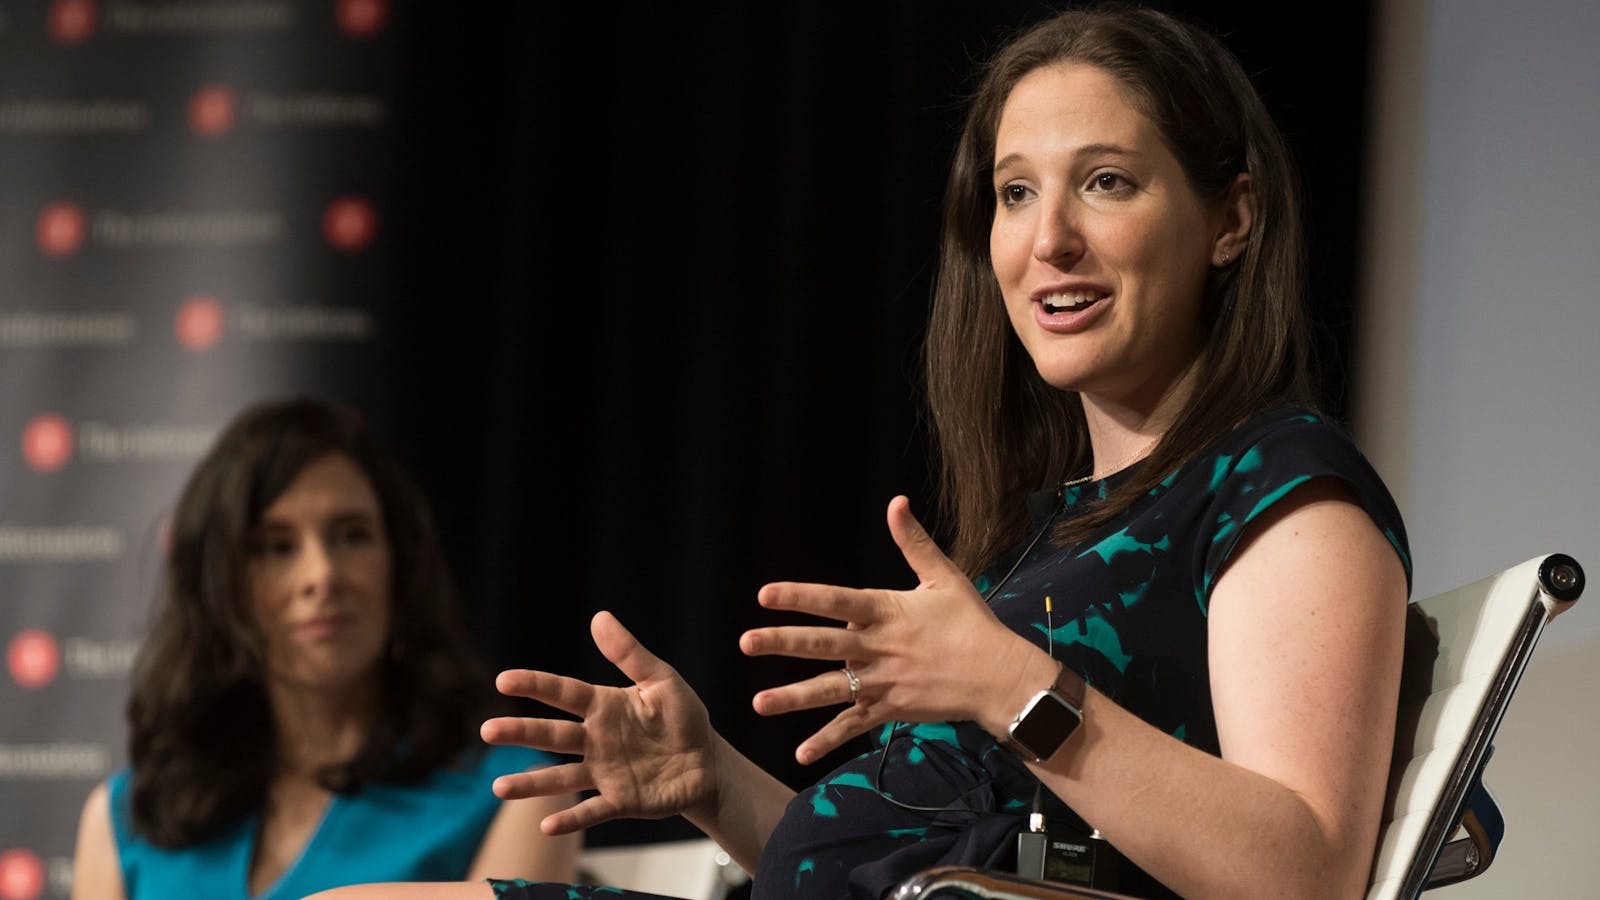 Uber's U.S. chief Rachel Holt on stage with The Information's Jessica Lessin. Photo by Erin Beach